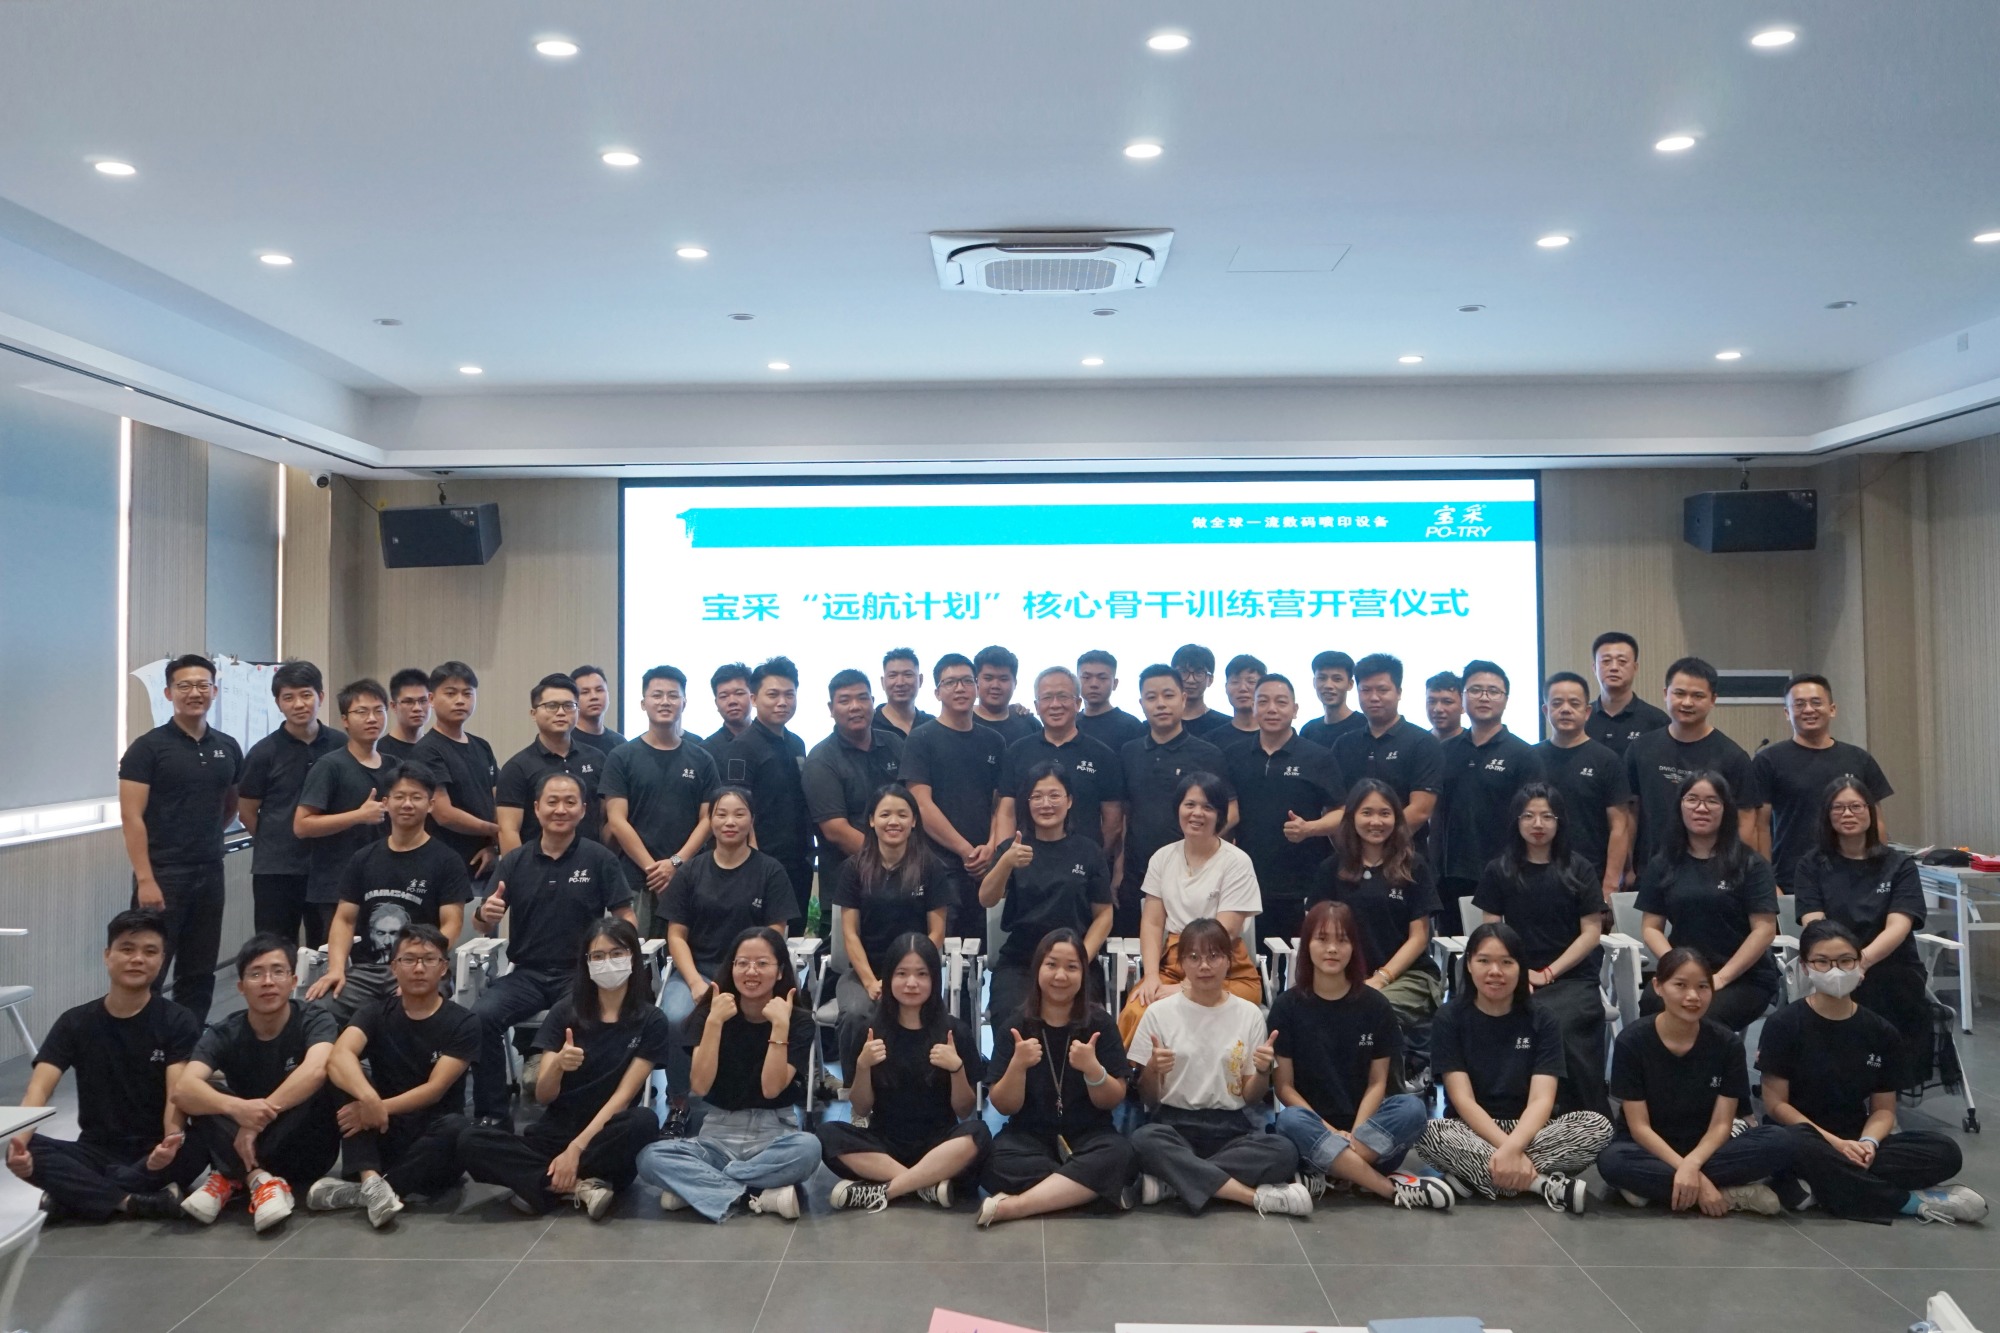 PO-TRY College Voyage Program Officially Launched